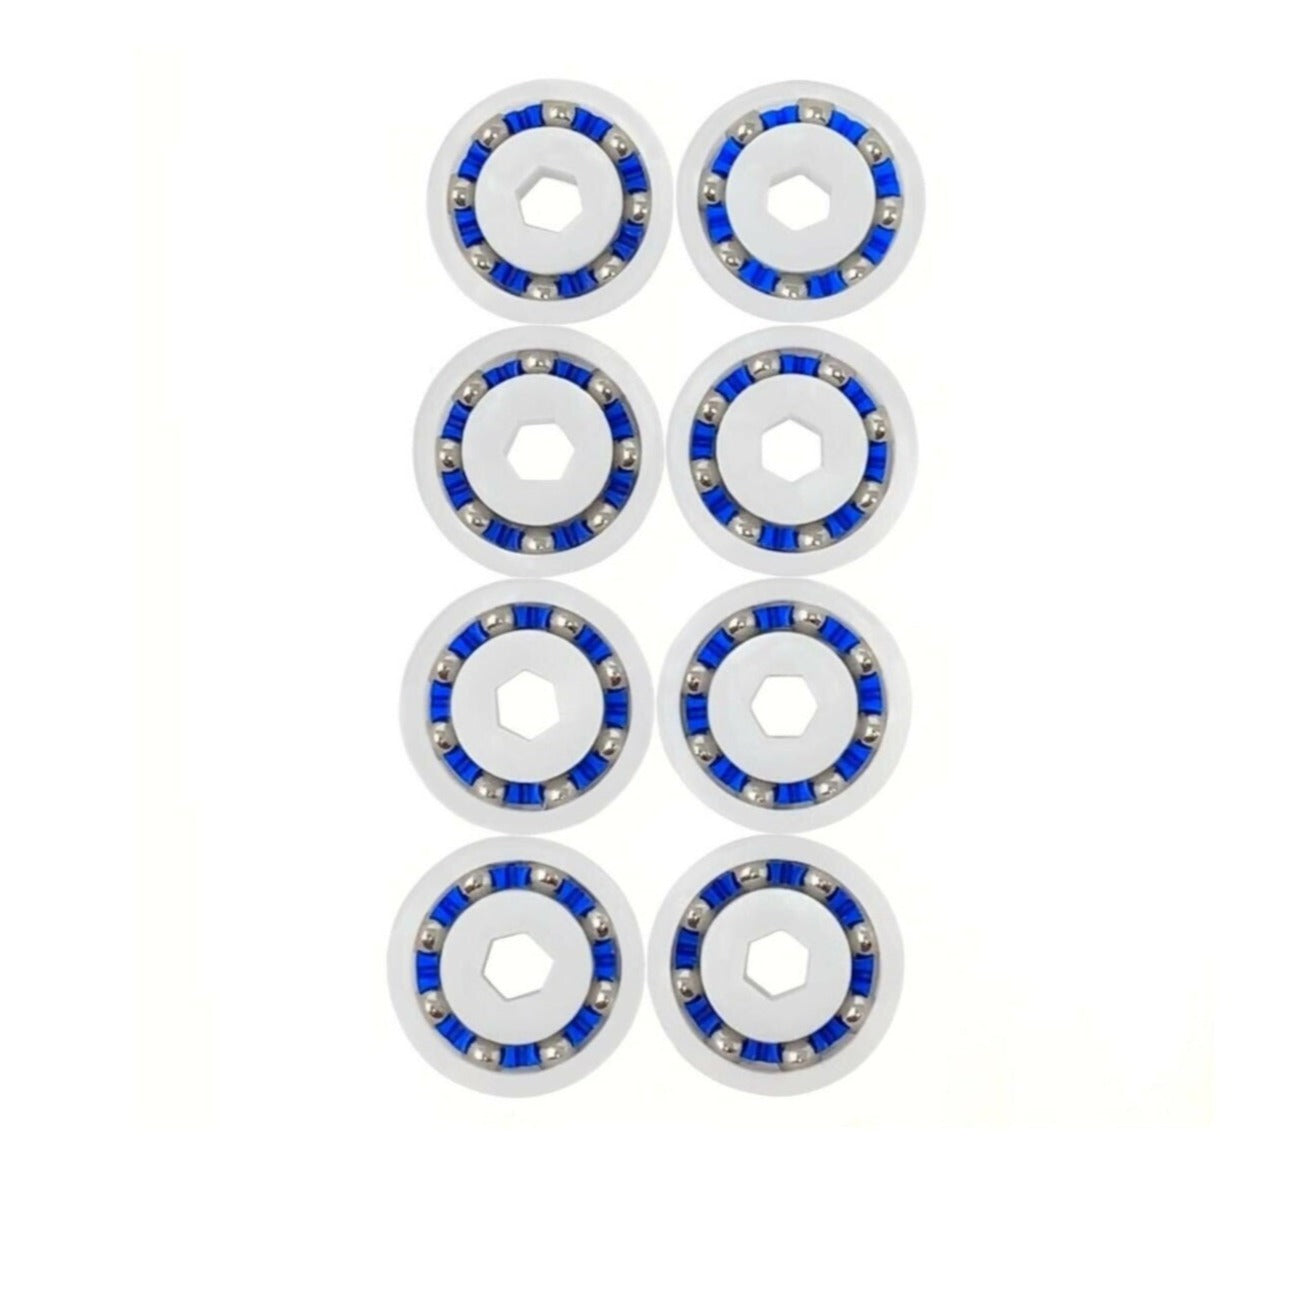 8 Pack Bearing Replacement Wheel For Polaris Pool Cleaner 360 380 9-100-1108